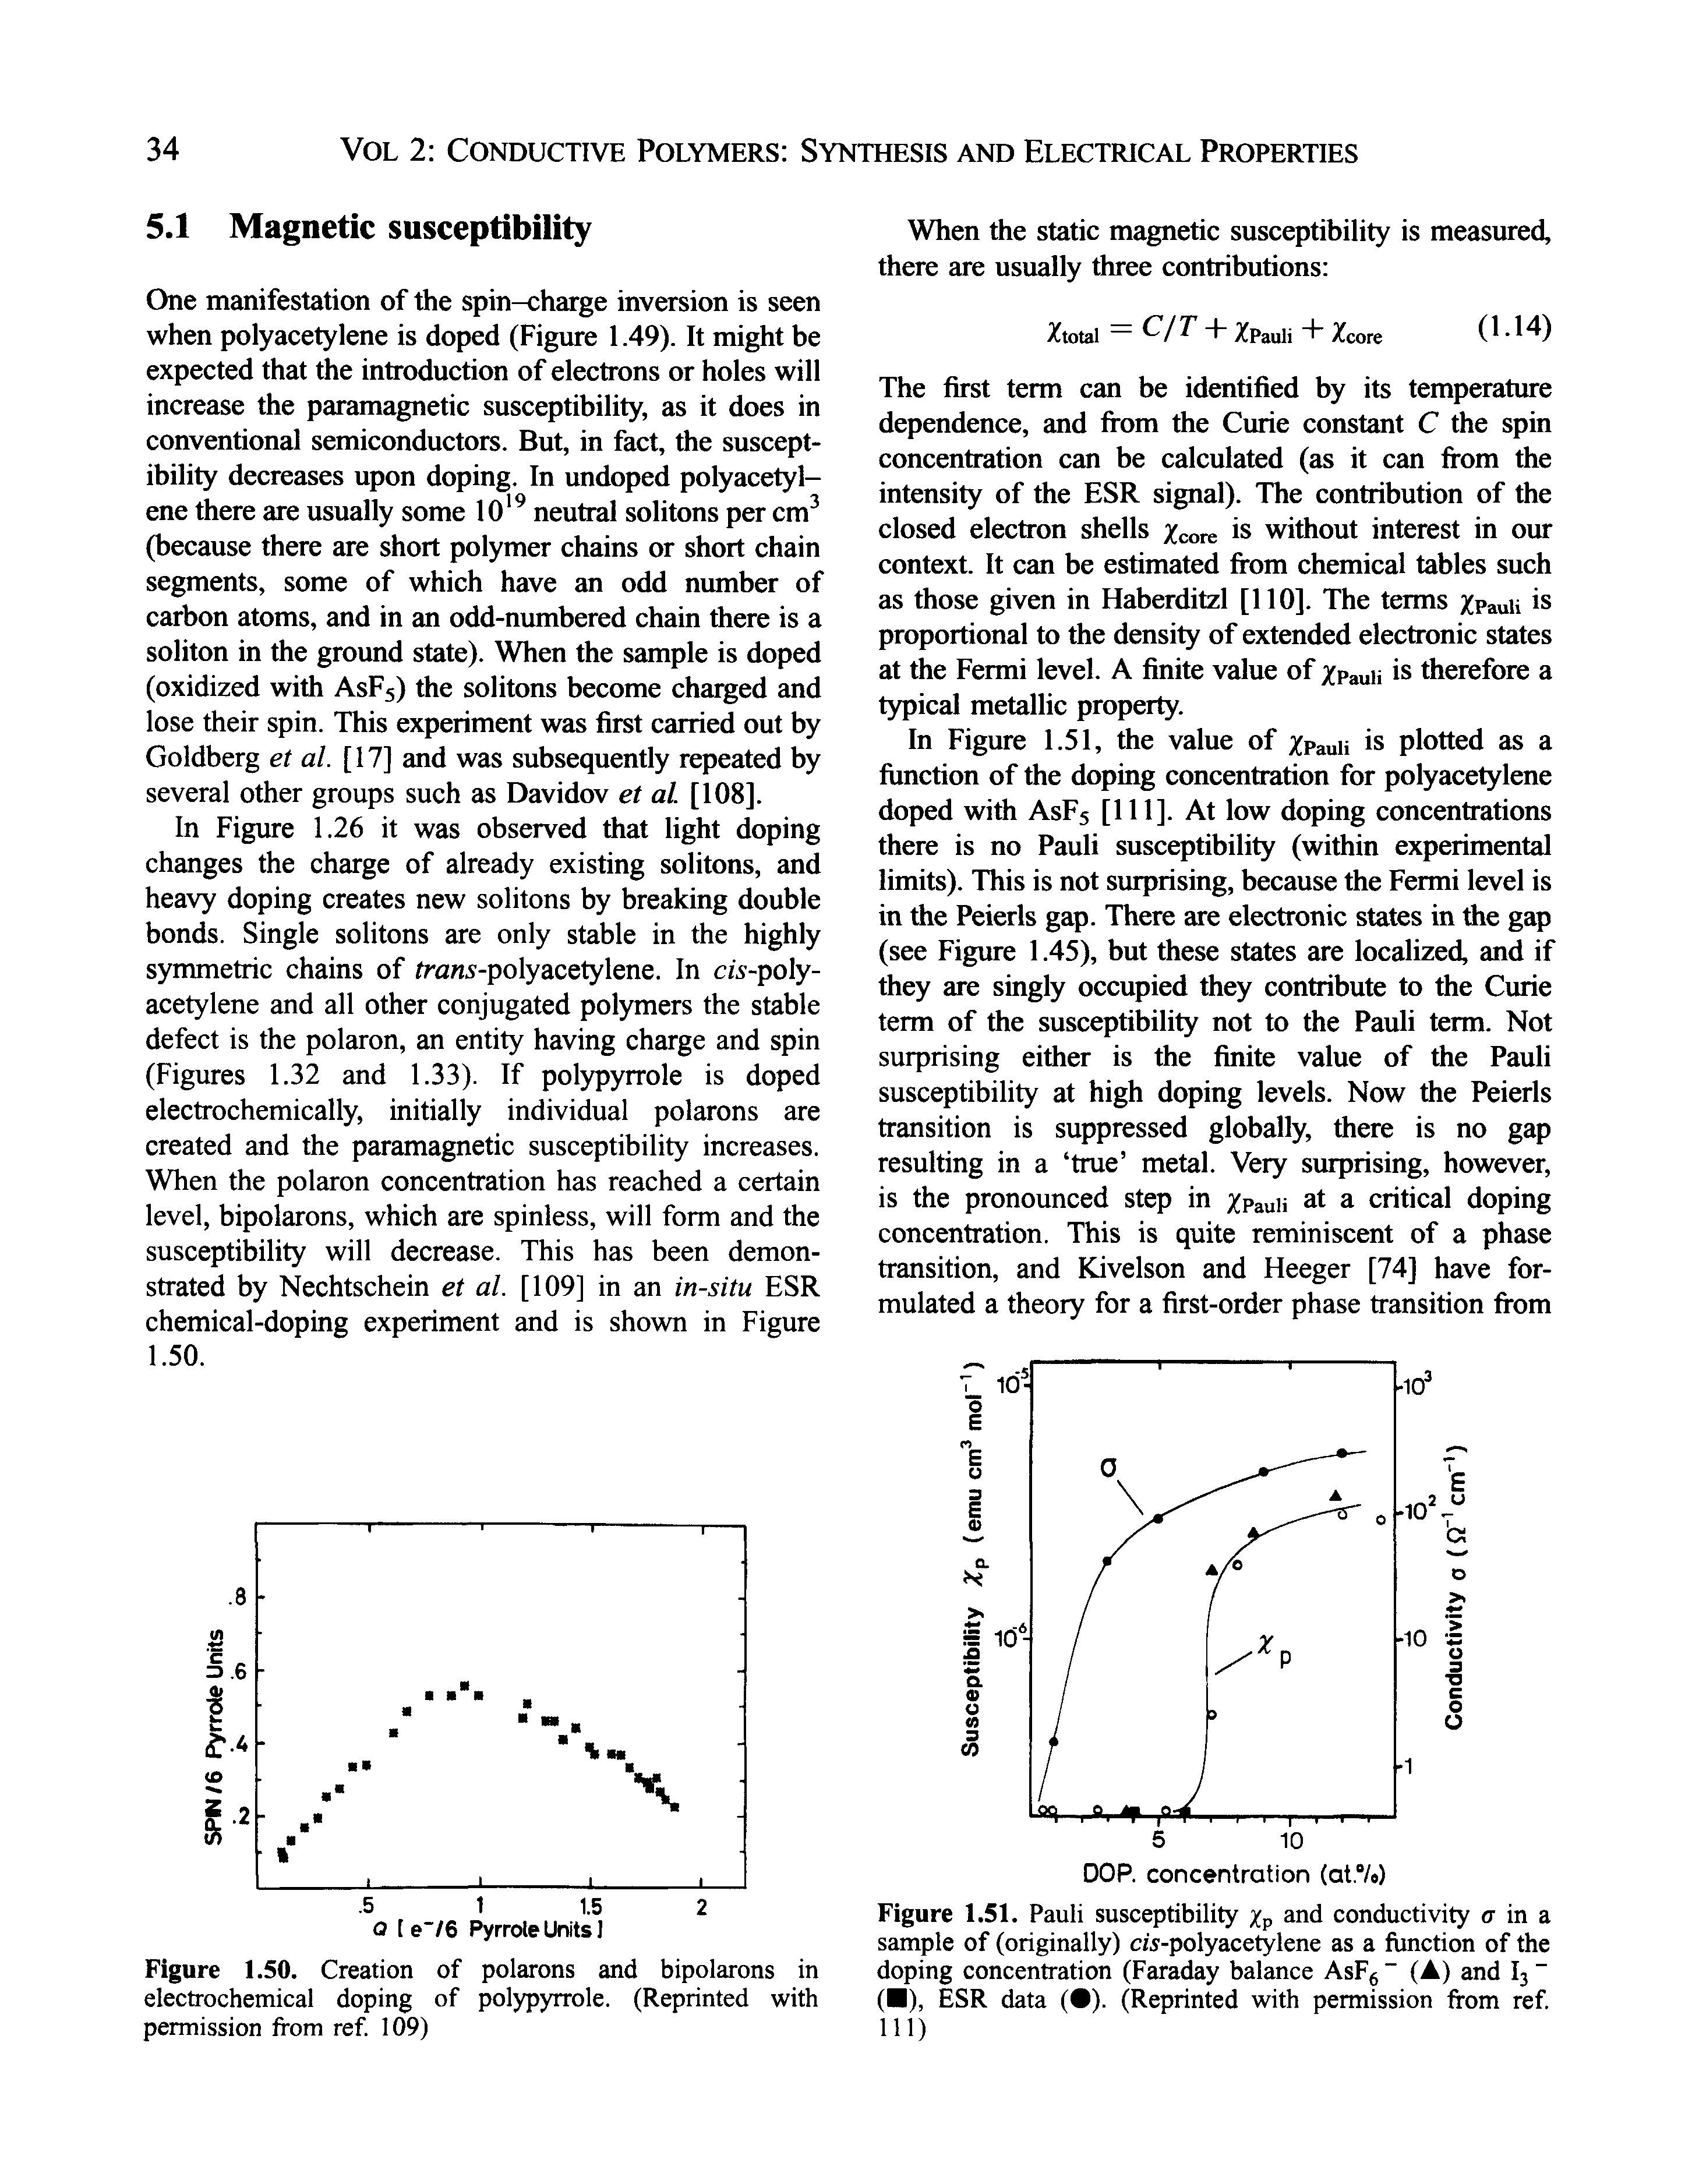 Figure 1.50. Creation of polarons and bipolarons in electrochemical doping of polypyrrole. (Reprinted with permission from ref. 109)...